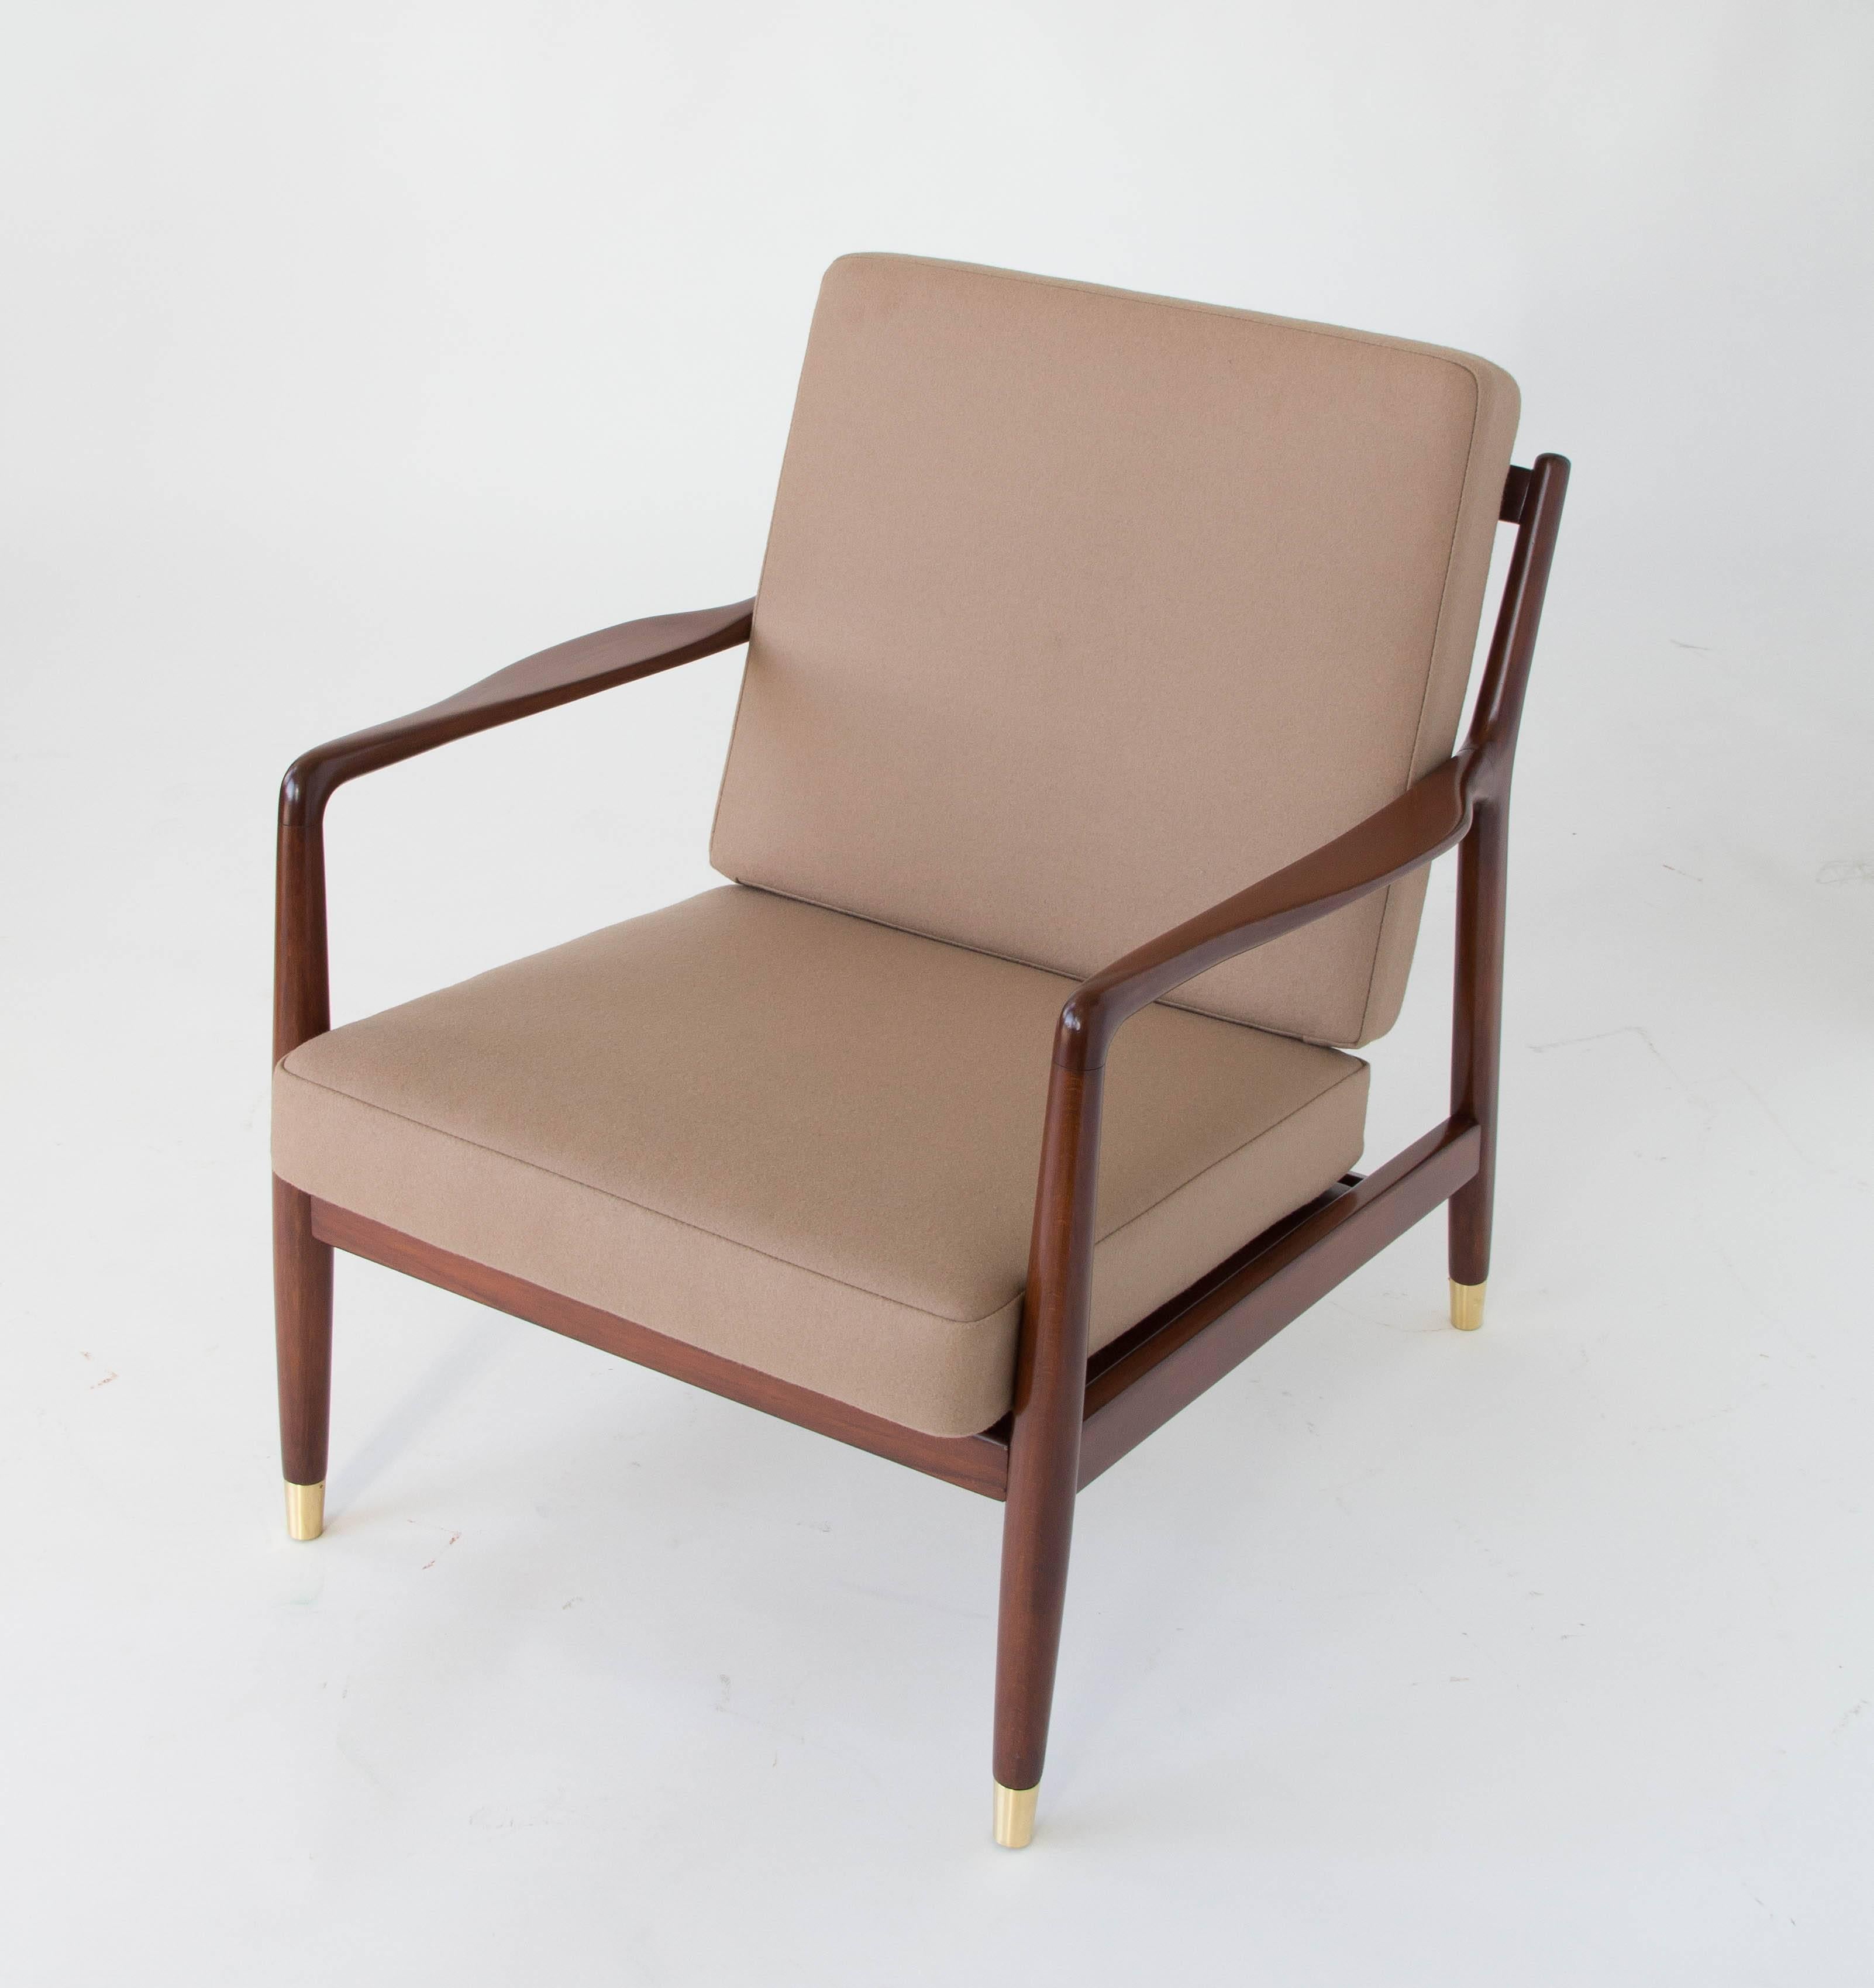 Pair of Lounge Chairs with Brass-Capped Legs by Folke Ohlsson for DUX (Schwedisch)